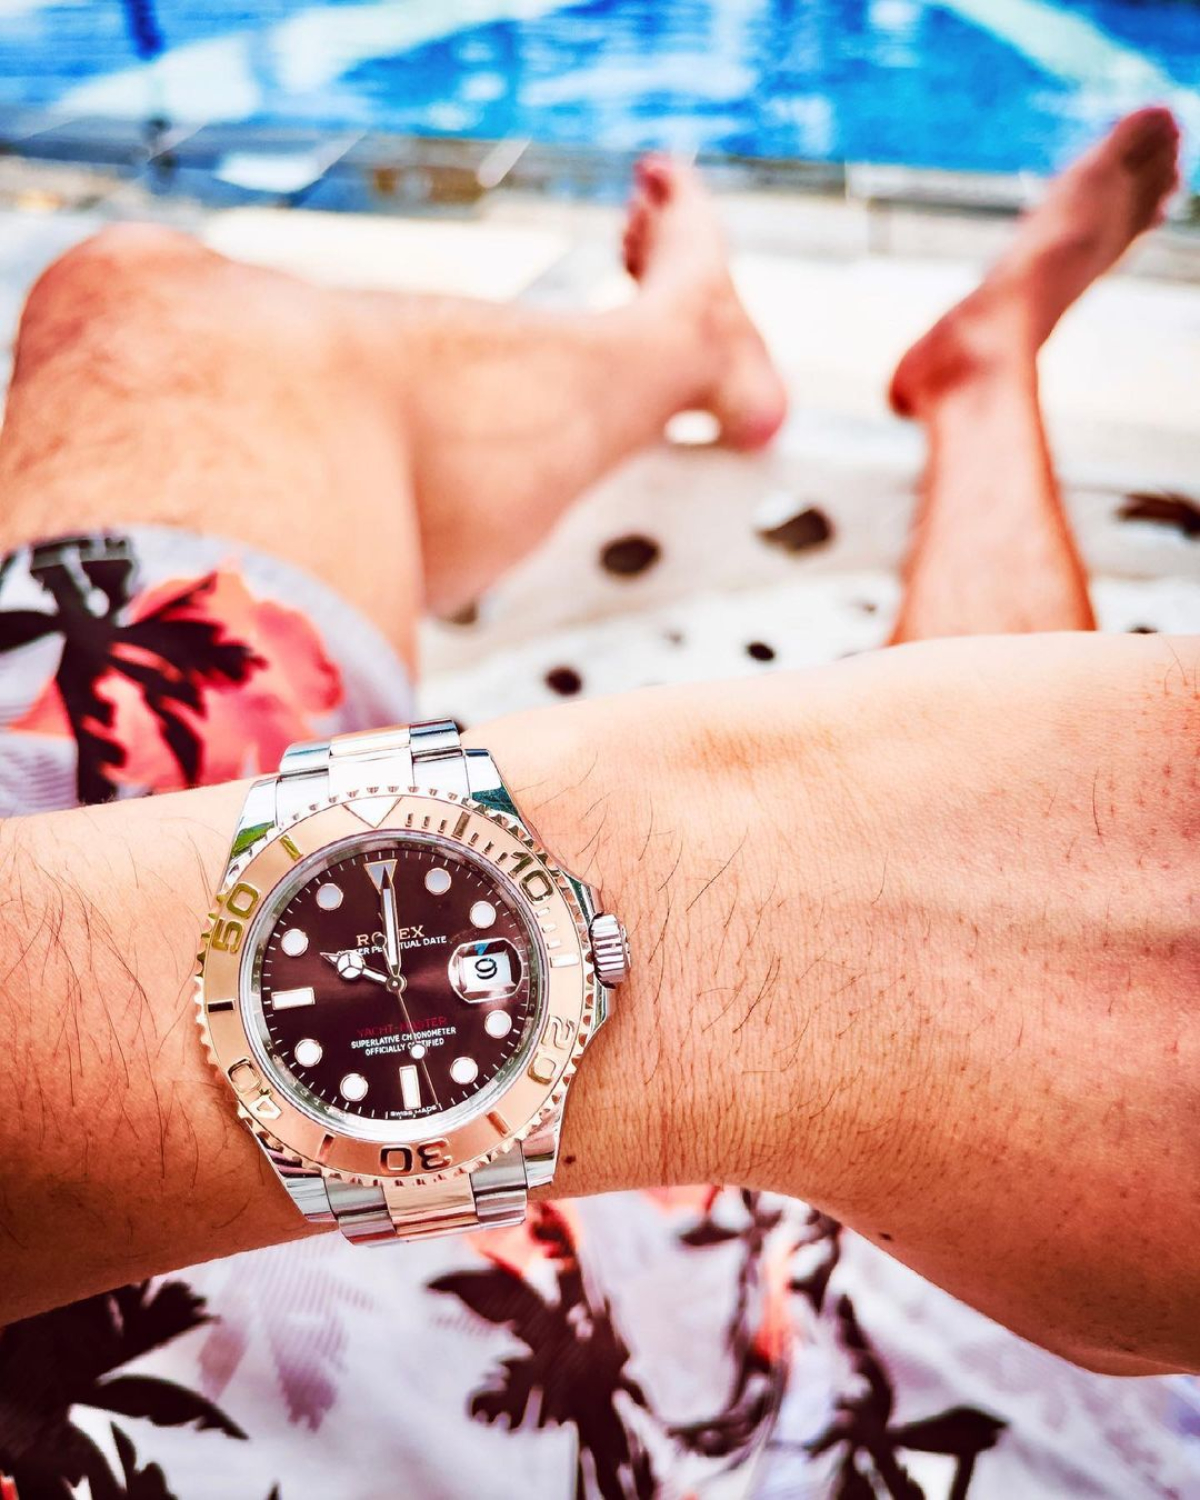 Rolex Yacht-Master Two Tone Watch